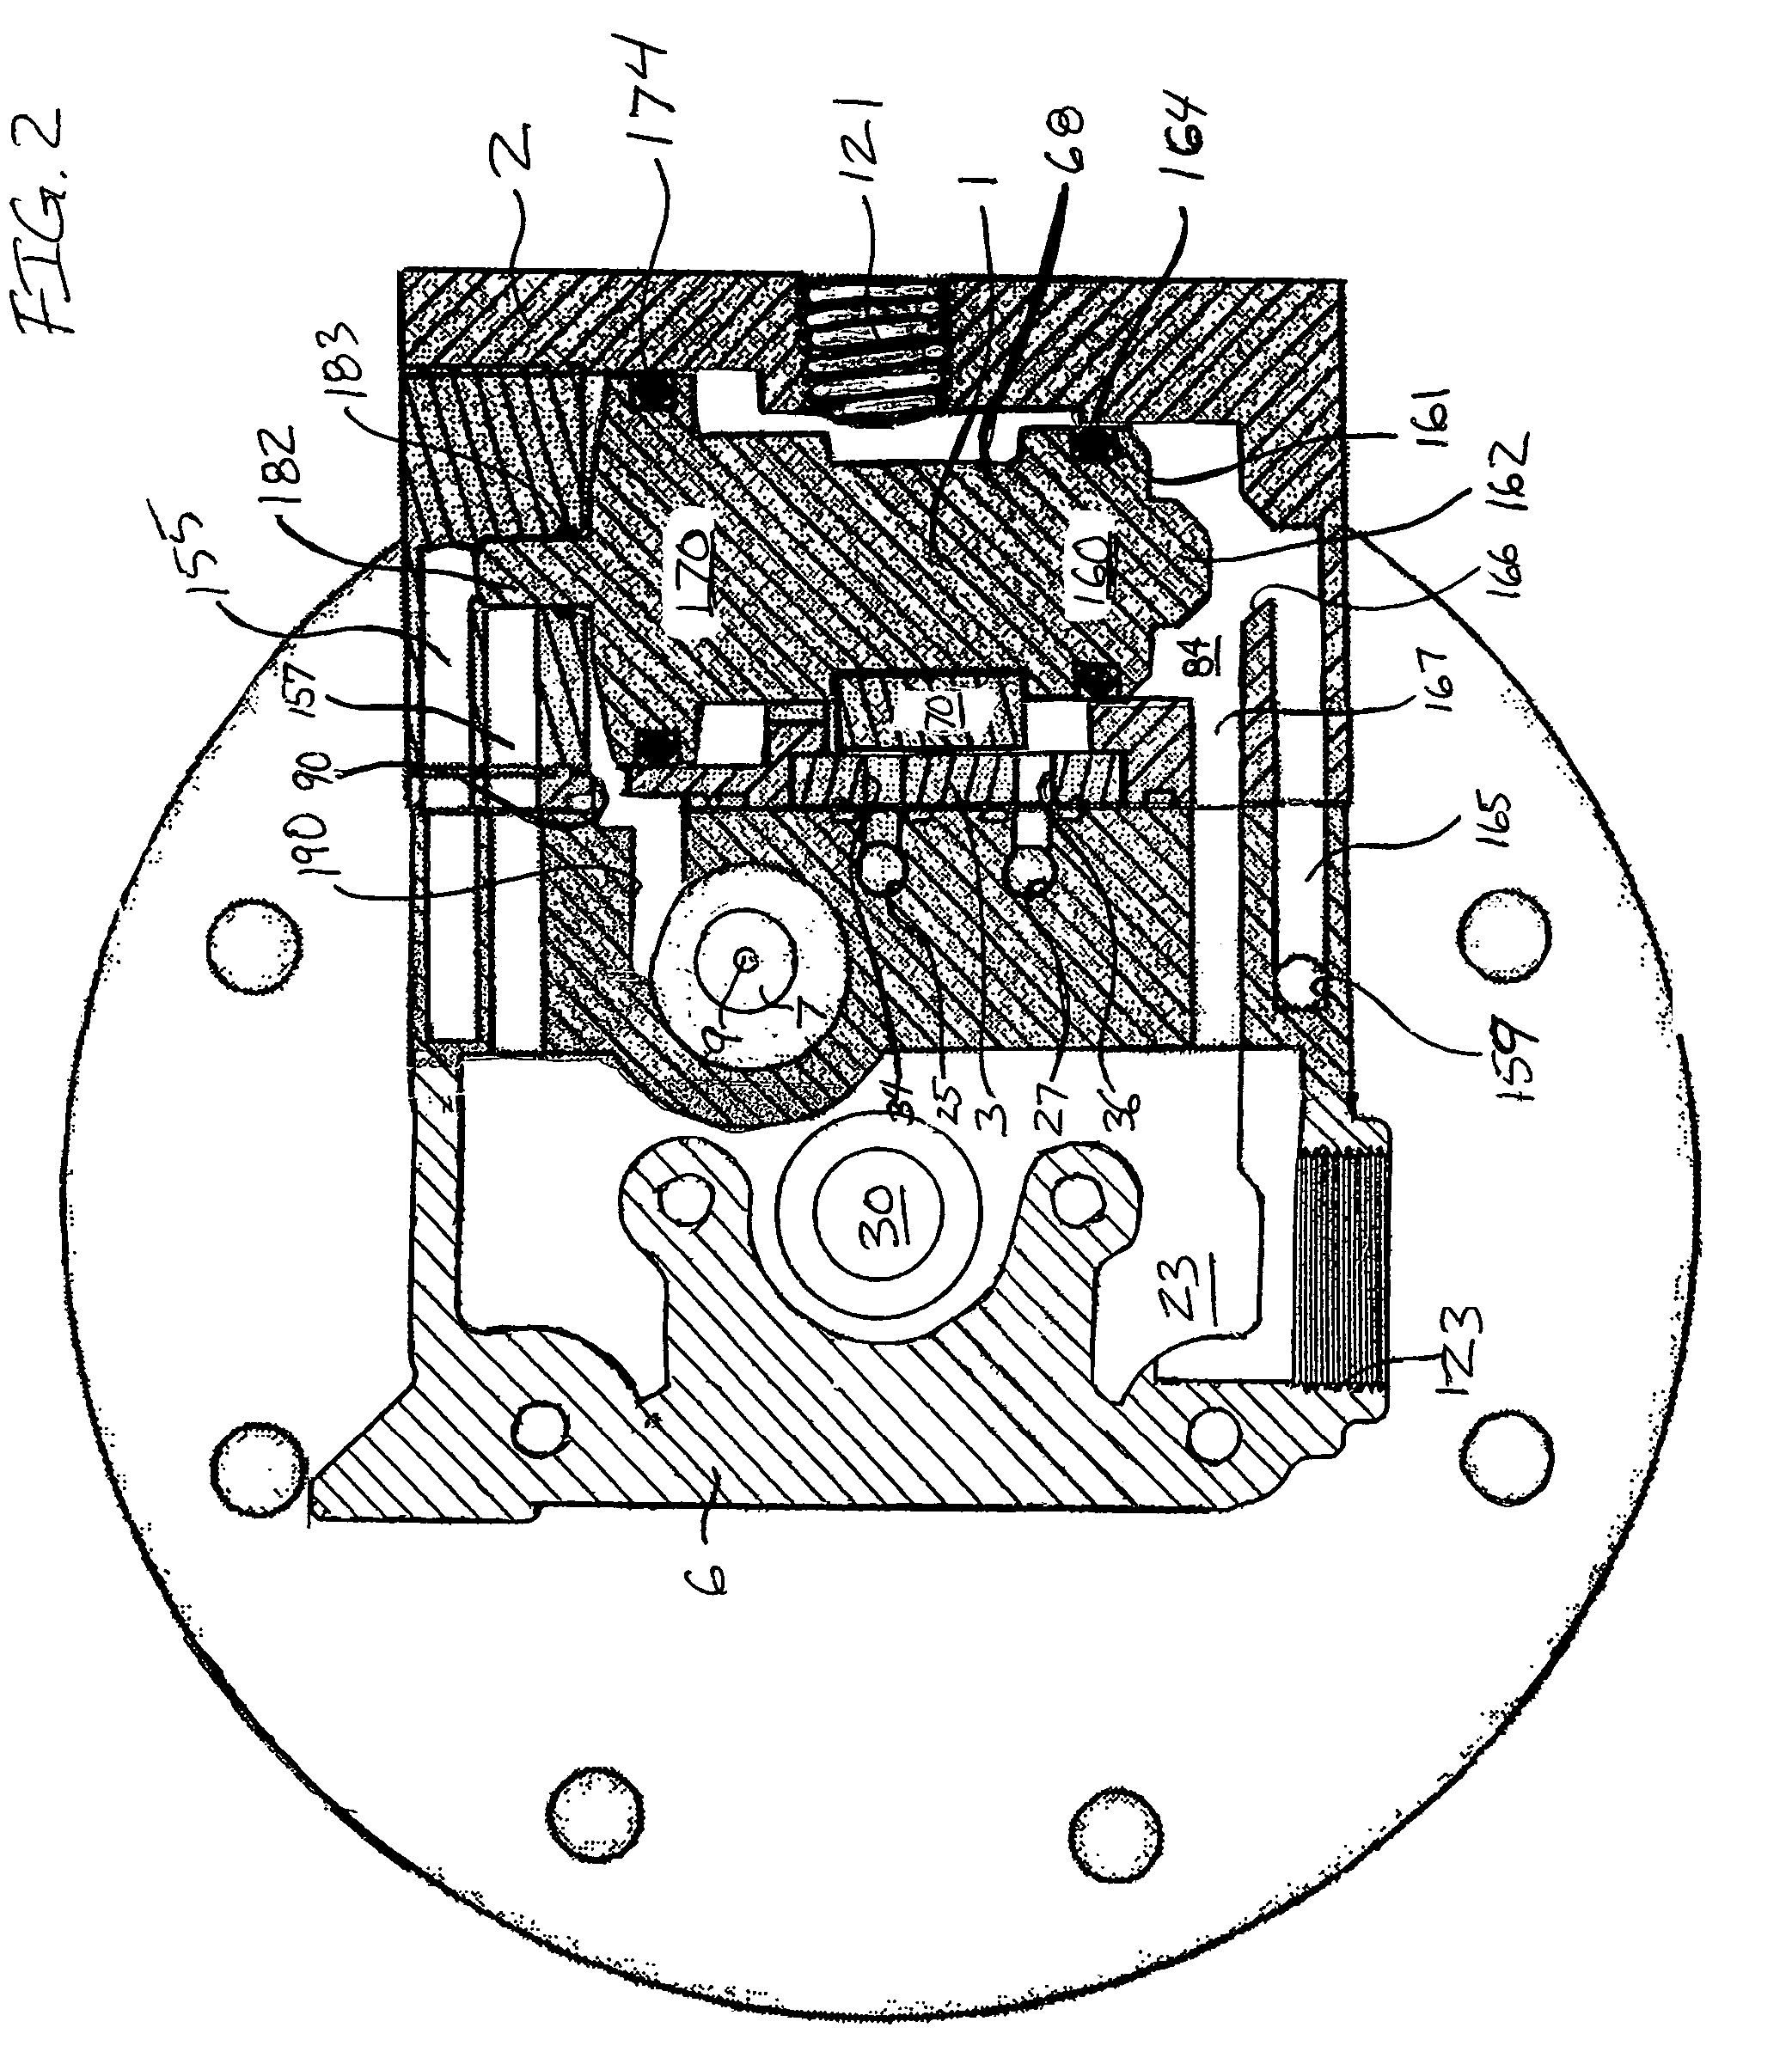 Reduced icing valves and gas-driven motor and reciprocating pump incorporating same